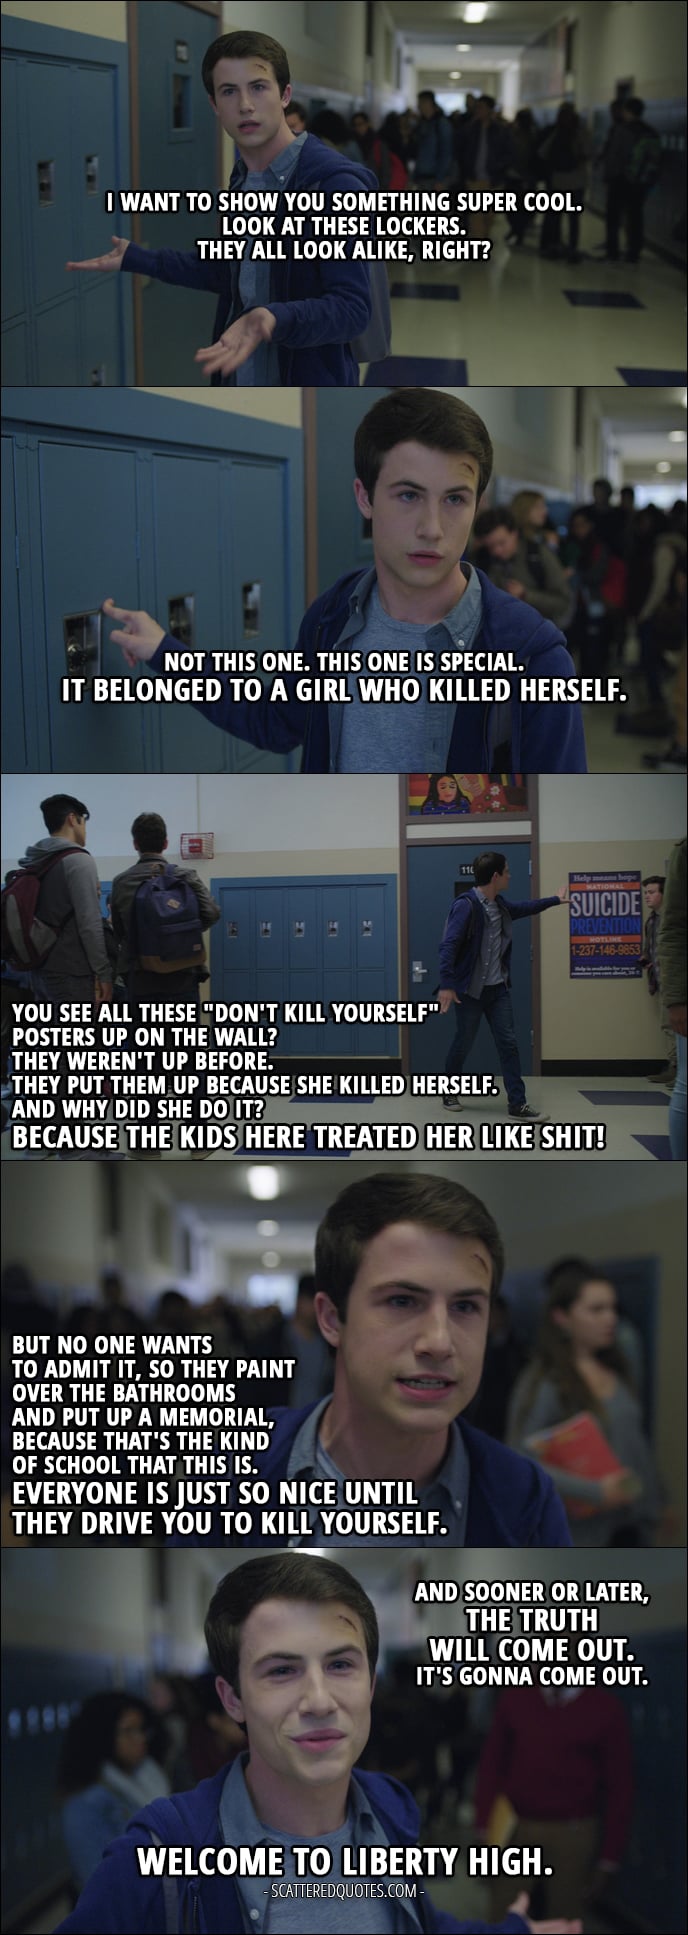 Quote from 13 Reasons Why 1x07 - Clay Jensen: I want to show you something super cool. Look at these lockers. They all look alike, right? Not this one. This one is special. It belonged to a girl who killed herself. You see all these "don't kill yourself" posters up on the wall? They weren't up before. They put them up because she killed herself. And why did she do it? Because the kids here treated her like shit! But no one wants to admit it, so they paint over the bathrooms and put up a memorial, because that's the kind of school that this is. Everyone is just so nice until they drive you to kill yourself. And sooner or later, the truth will come out. It's gonna come out. Welcome to Liberty High.